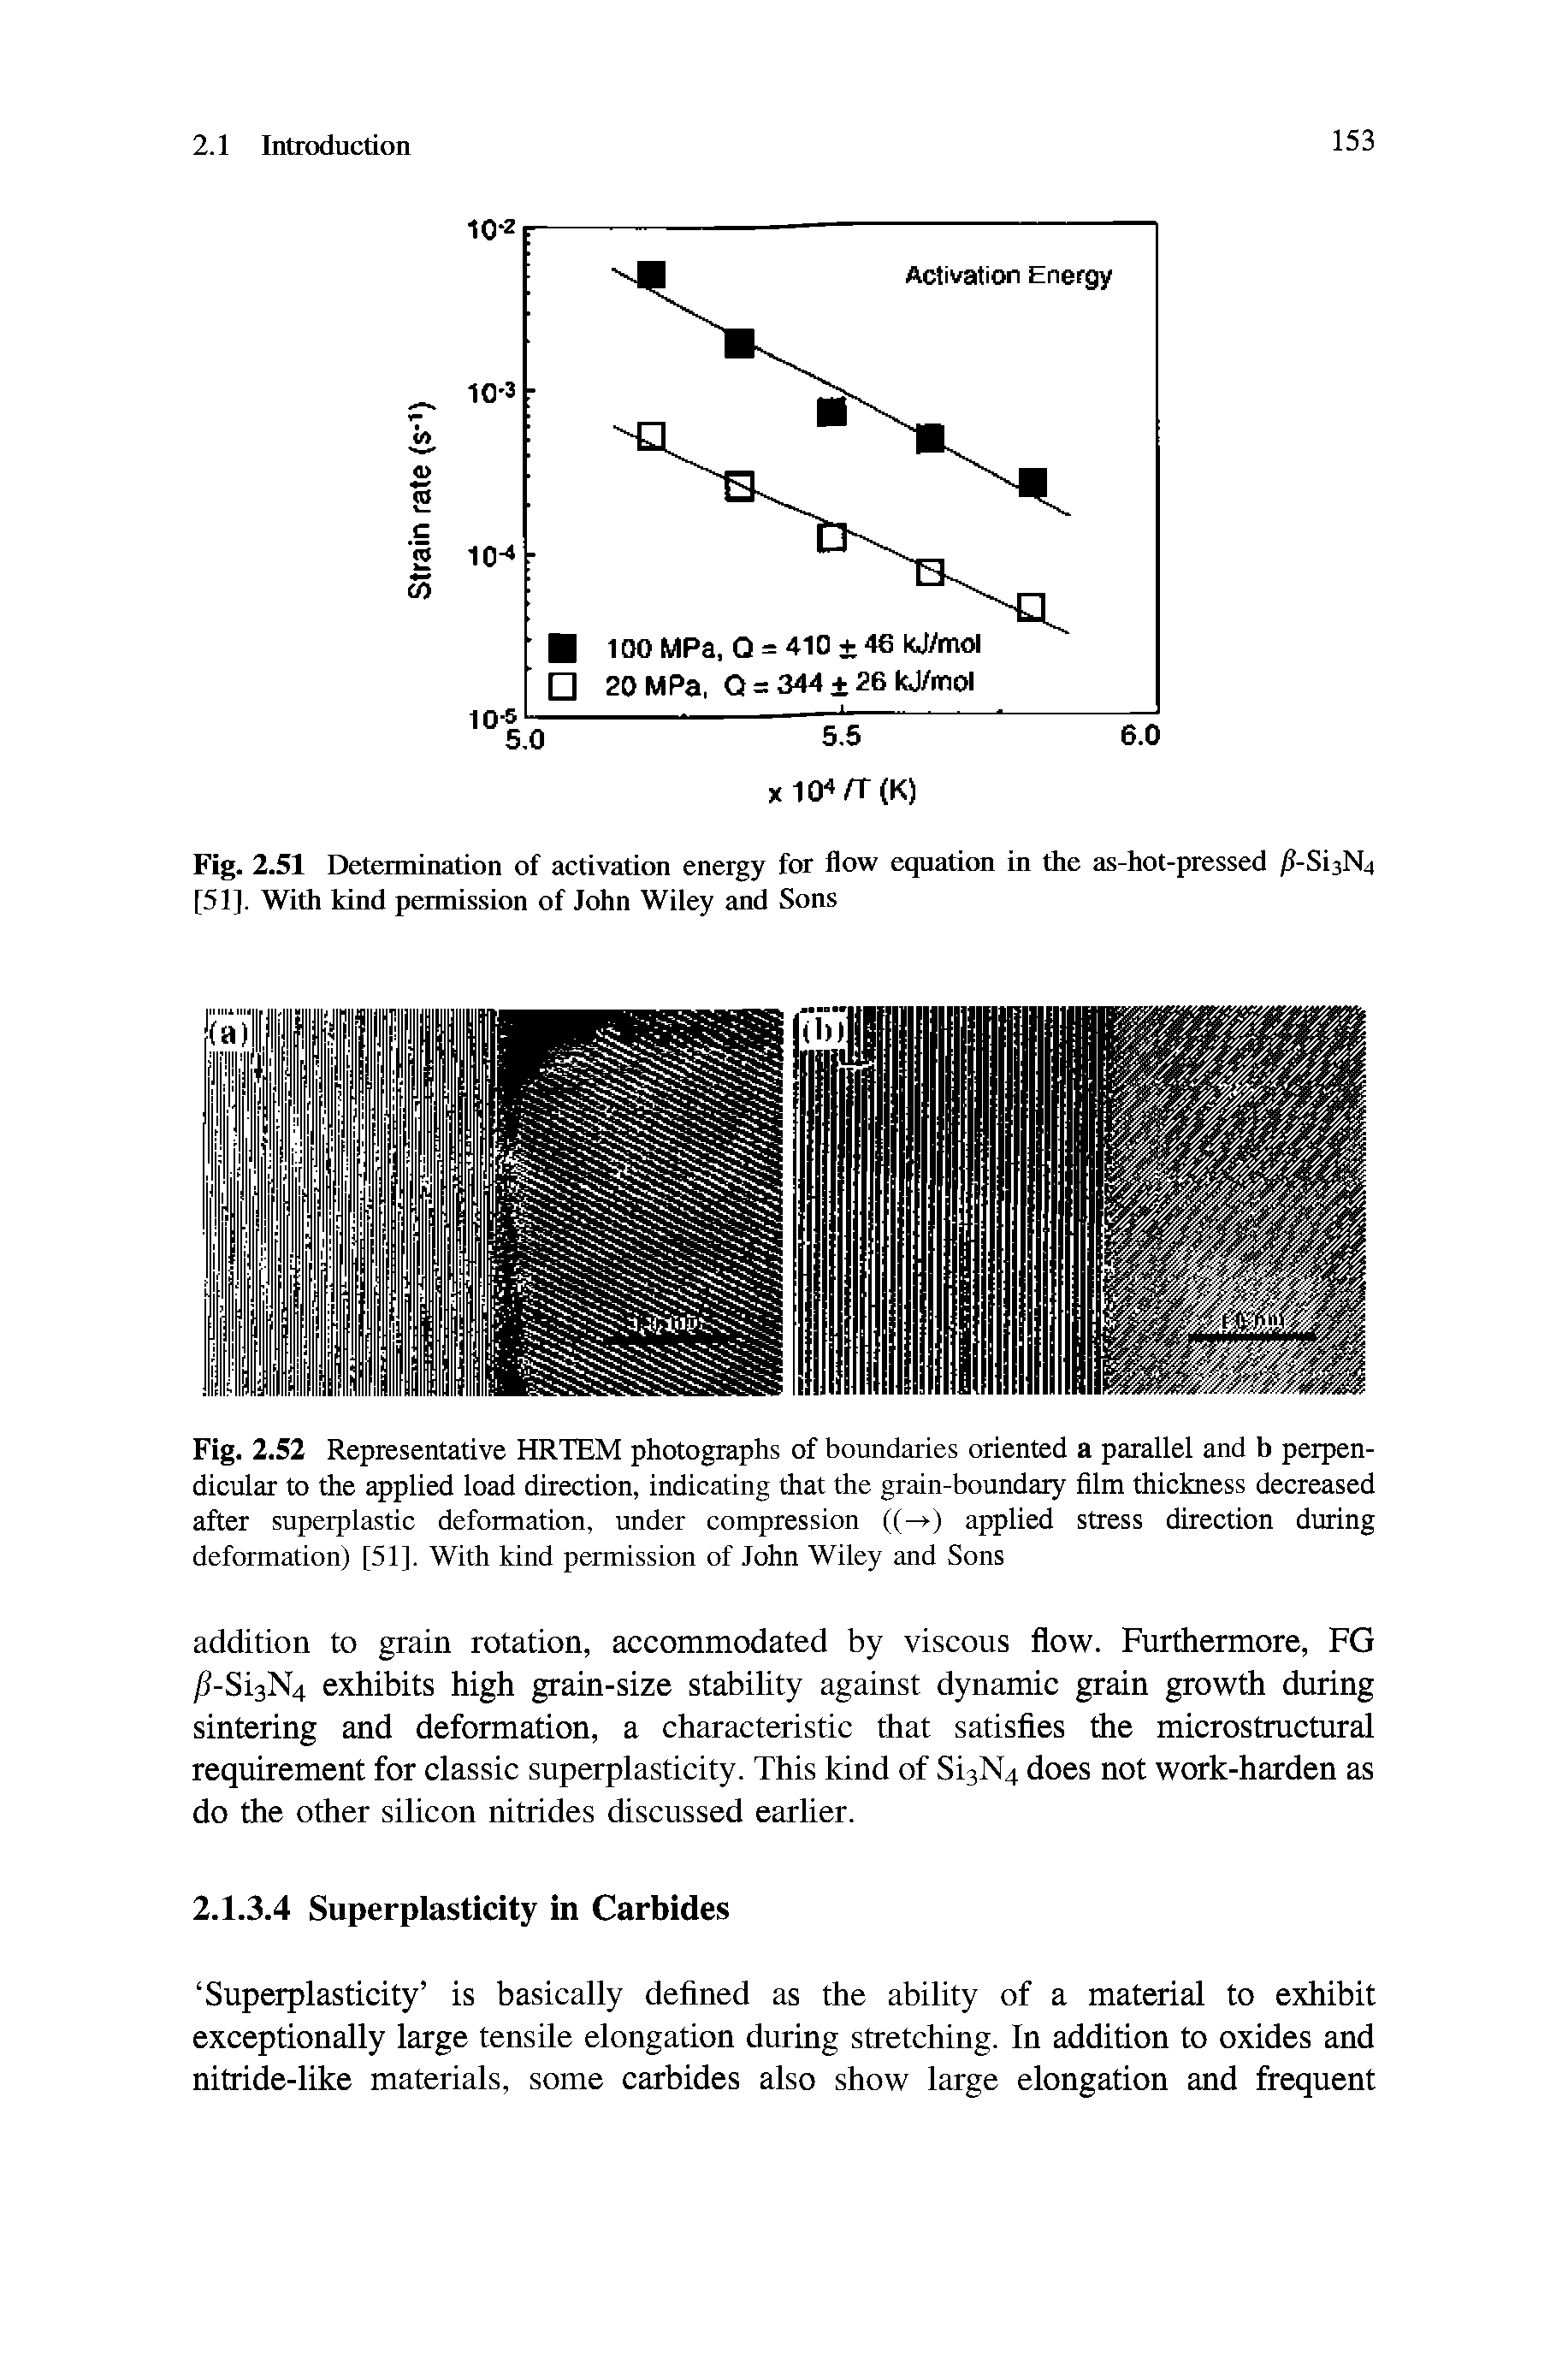 Fig. 2.52 Representative HRTEM photographs of boundaries oriented a parallel and b perpendicular to the applied load direction, indicating that the grain-boundary film thickness decreased after superplastic deformation, under compression ((->) applied stress direction during deformation) [51], With kind permission of John Wiley and Sons...